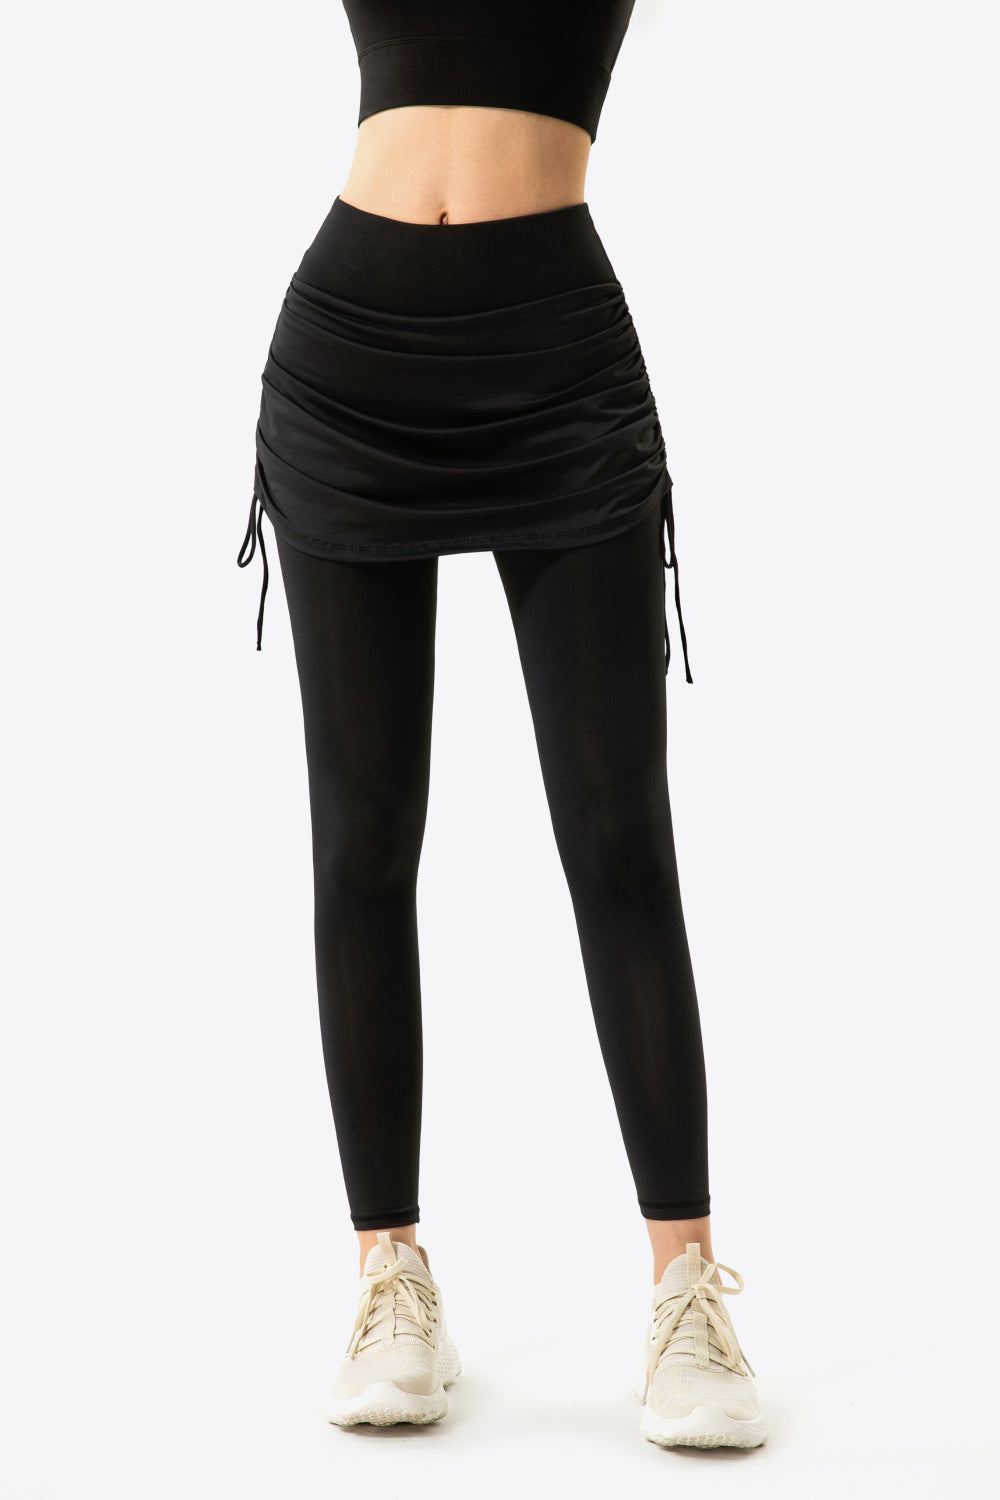 Black A Vibe You Won't Find Anywhere Else Drawstring Ruched Faux Layered Yoga Leggings Leggings